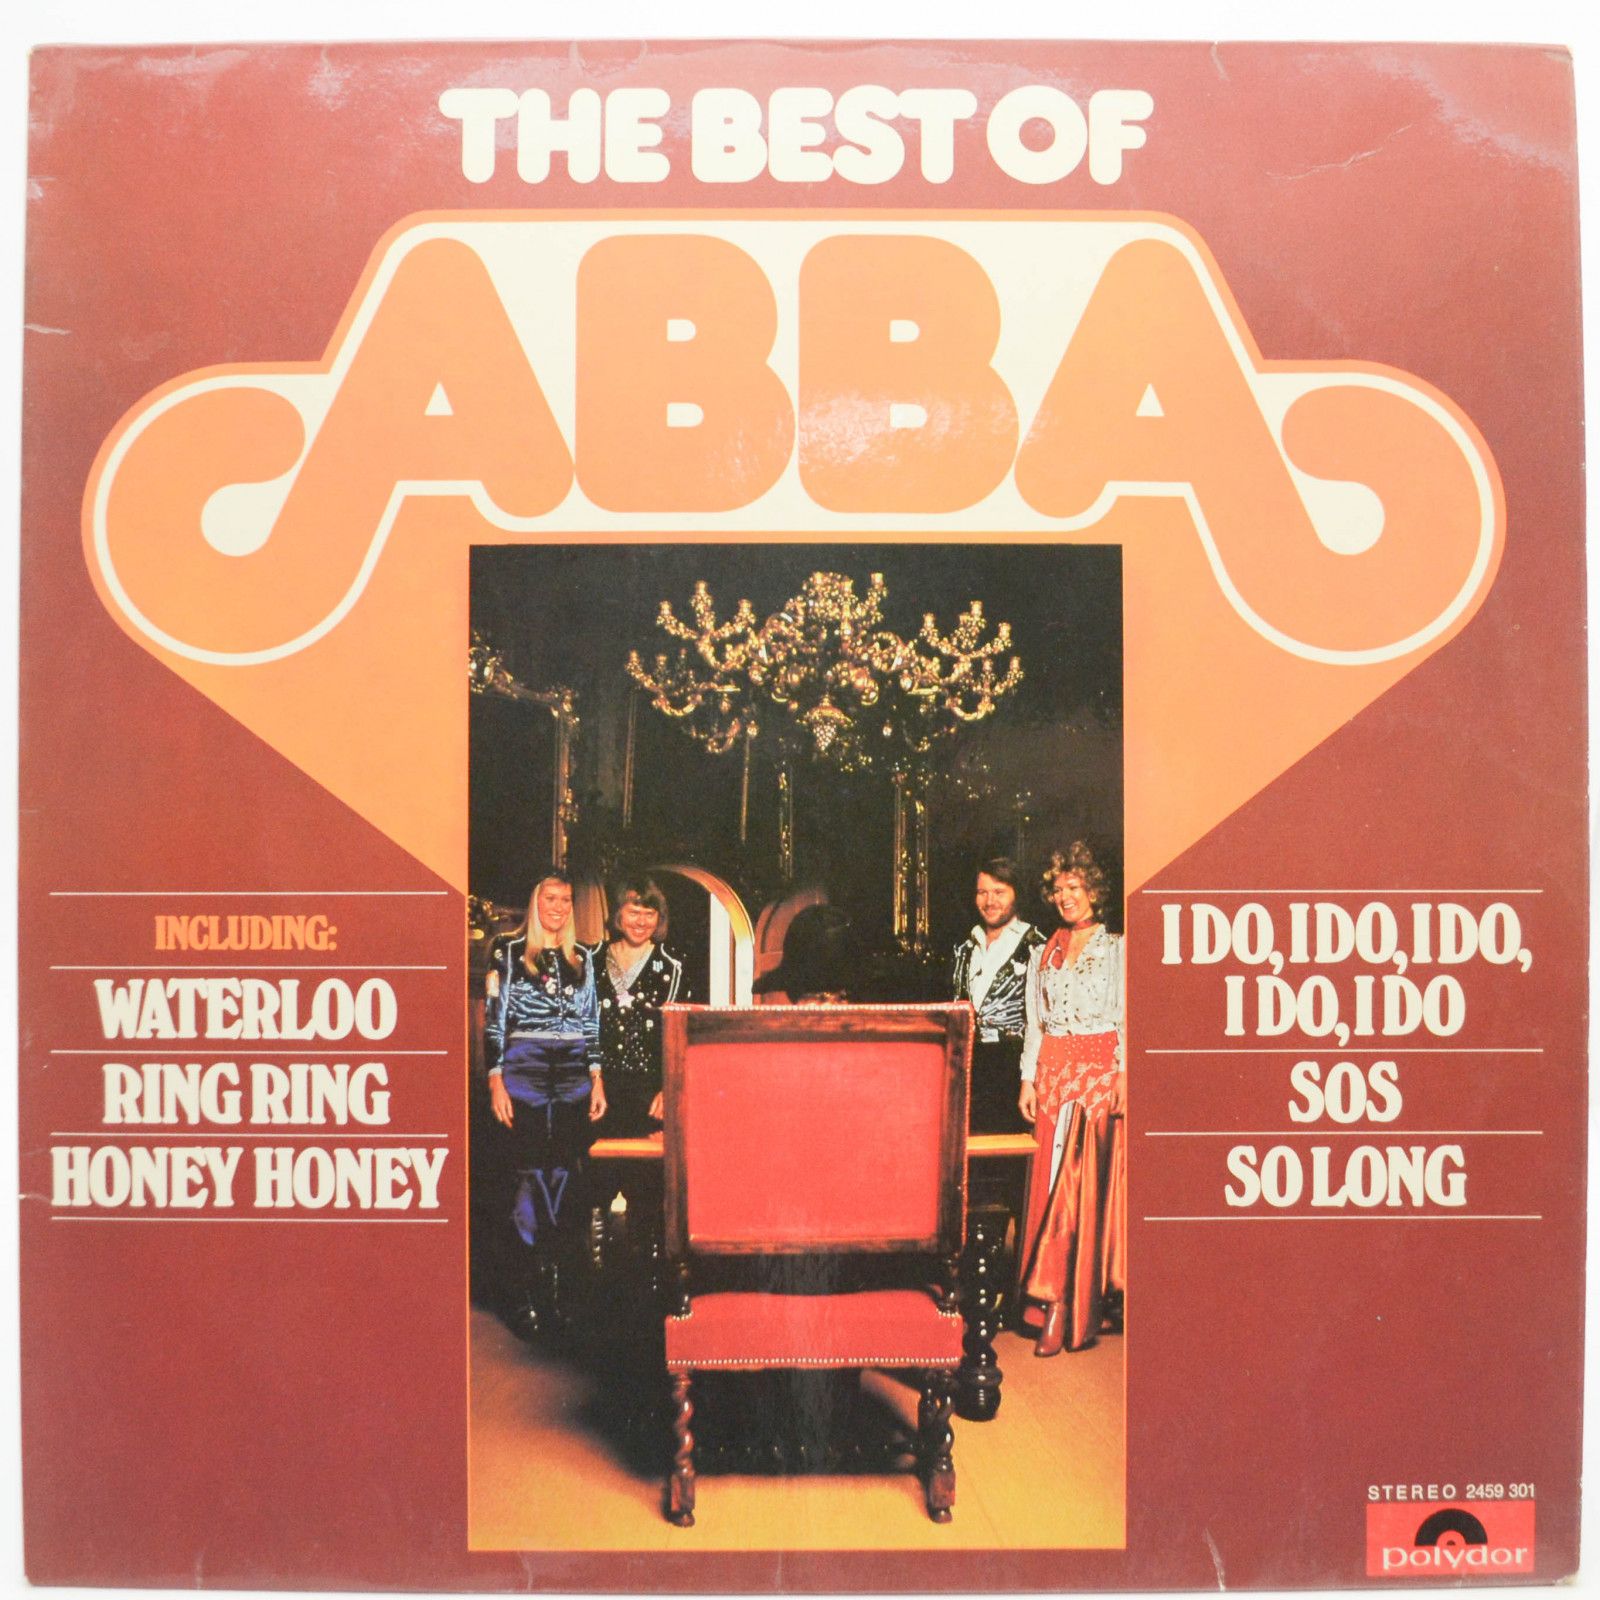 ABBA — The Best Of ABBA, 1975